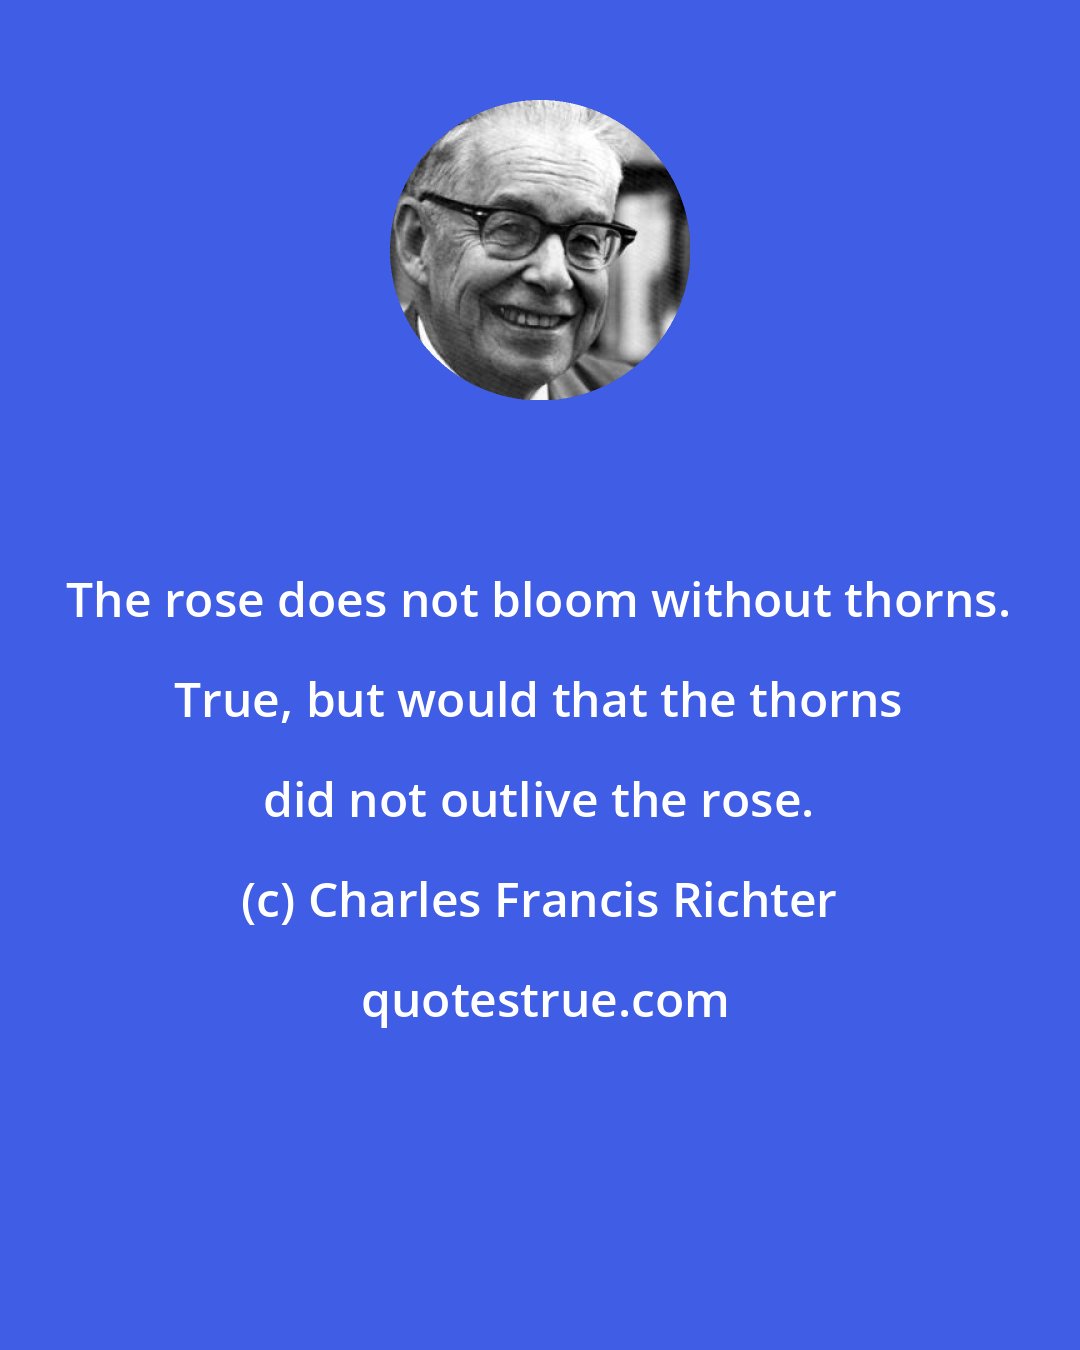 Charles Francis Richter: The rose does not bloom without thorns. True, but would that the thorns did not outlive the rose.